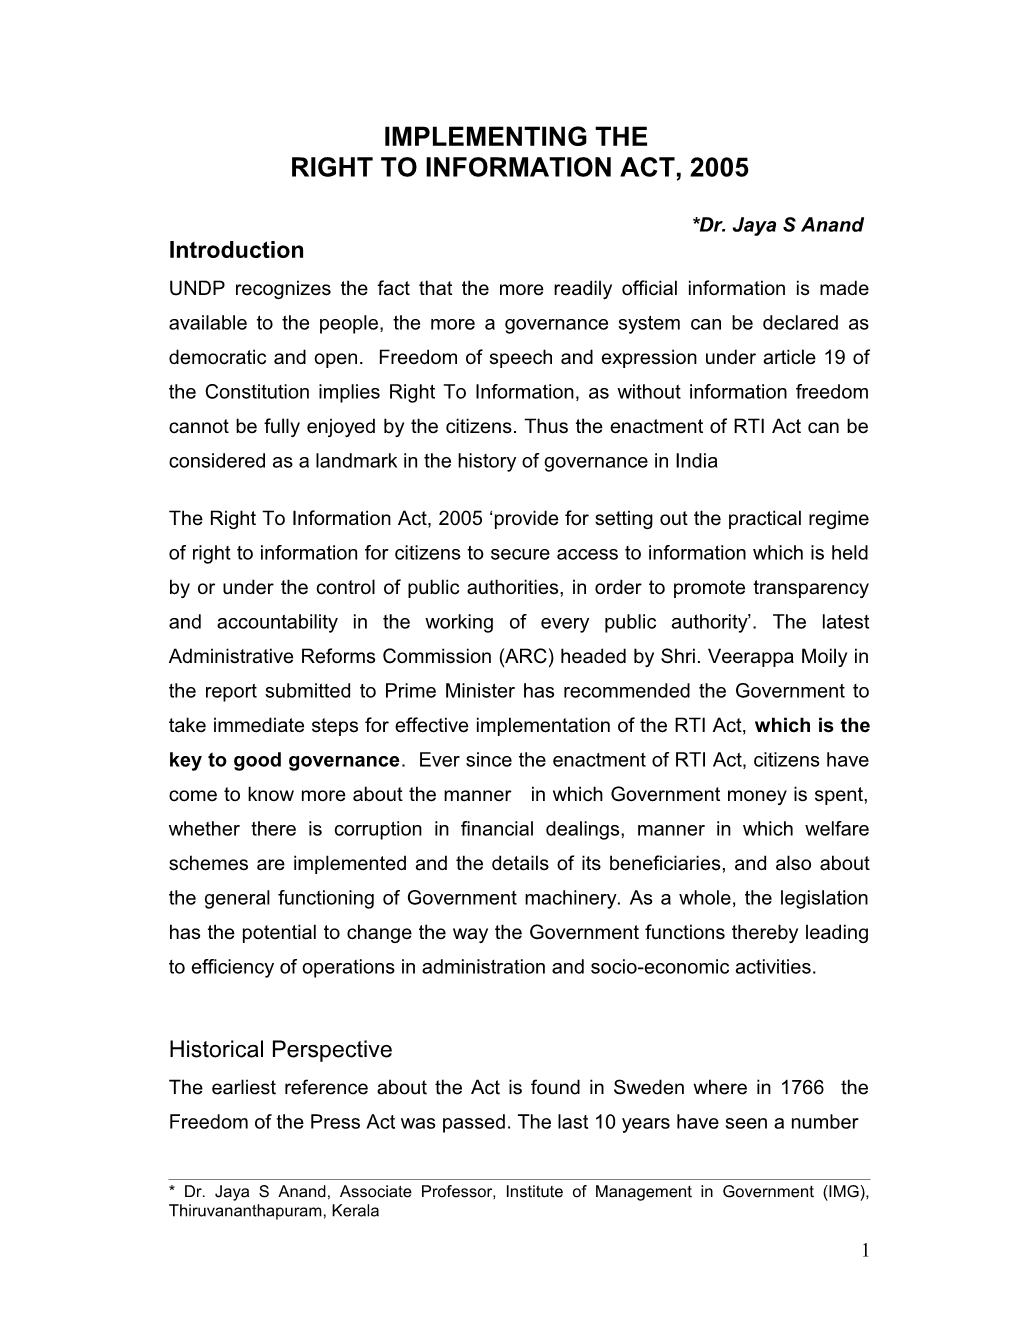 Implementing the RTI Act